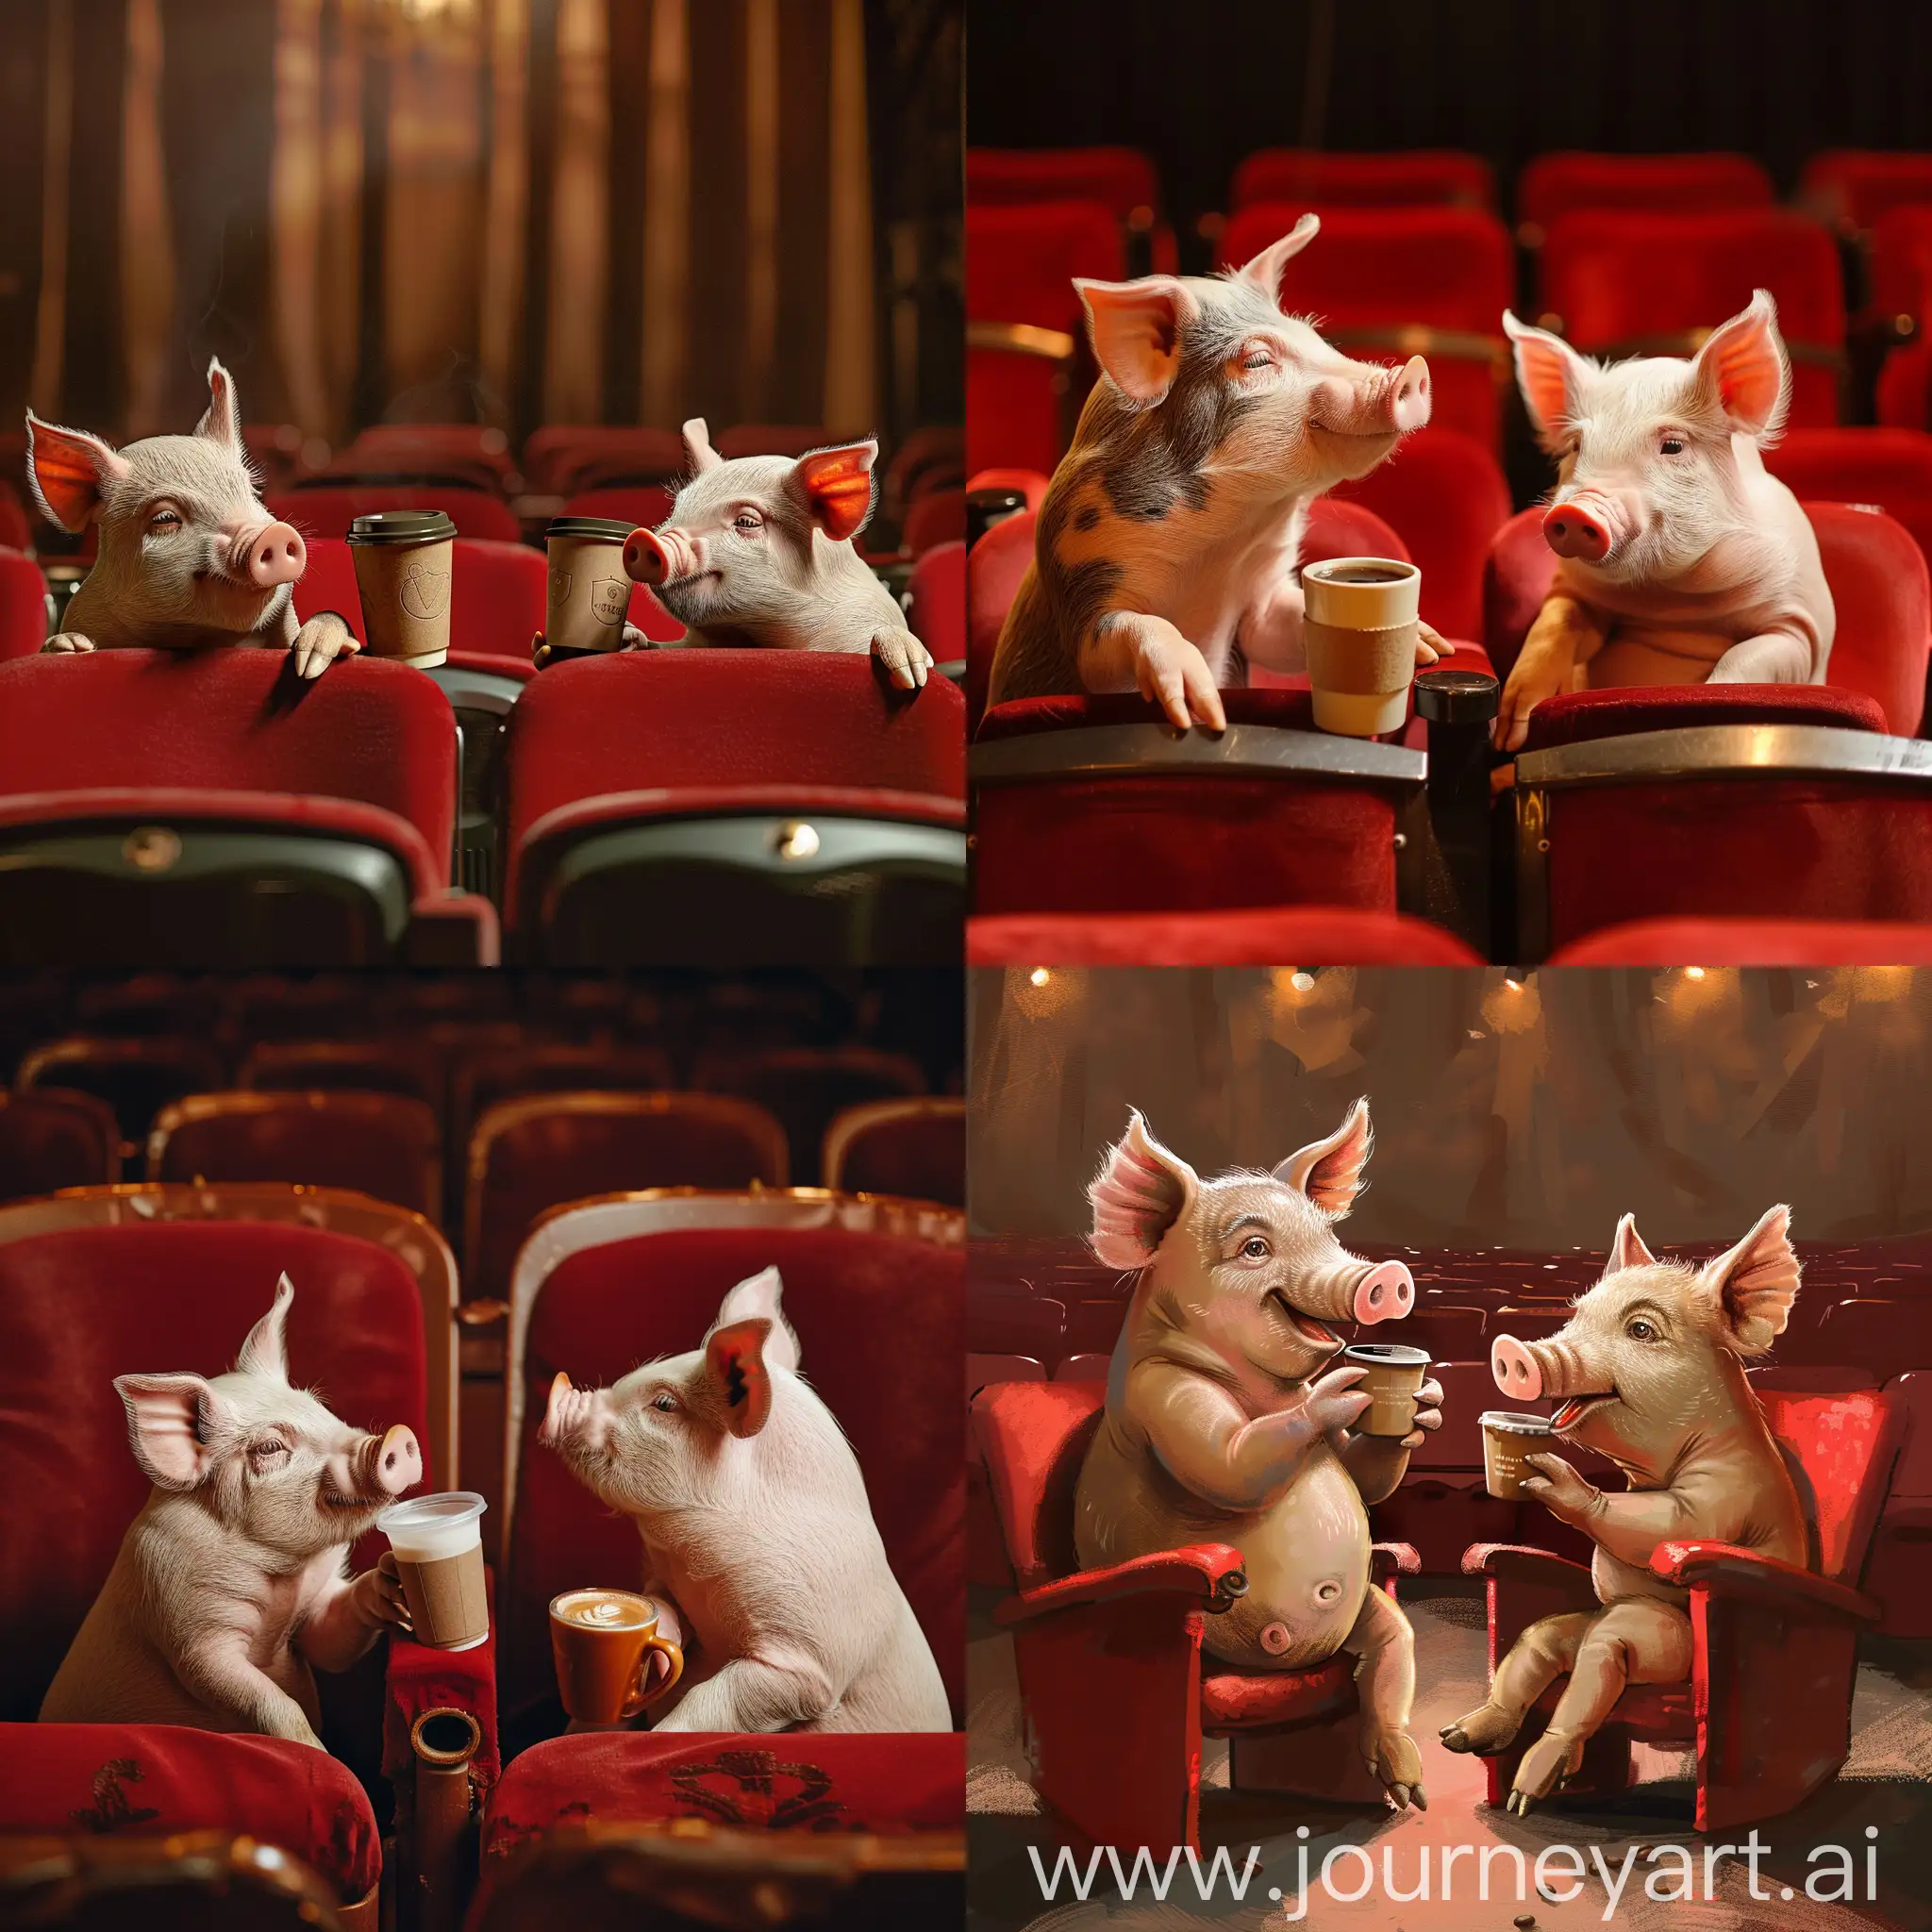 2 pigs are sitting in the theater and drinking coffee, realizm